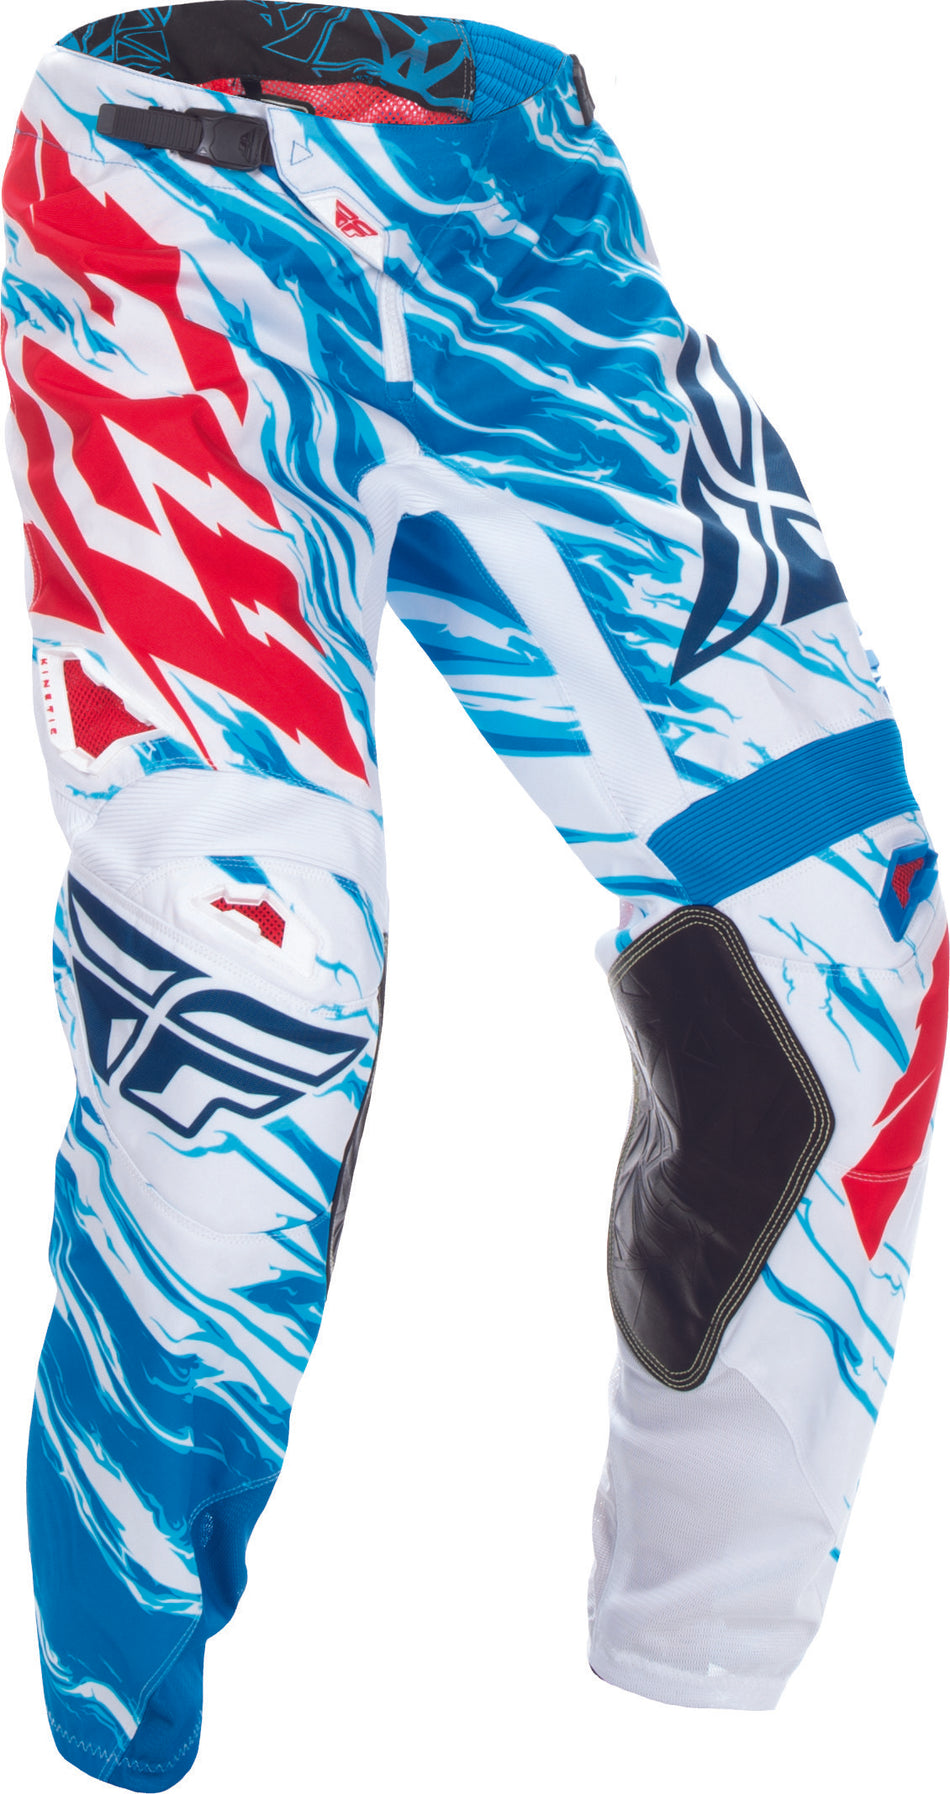 FLY RACING Kinetic Relapse Pant Red/White/Blue Sz 26 370-43226